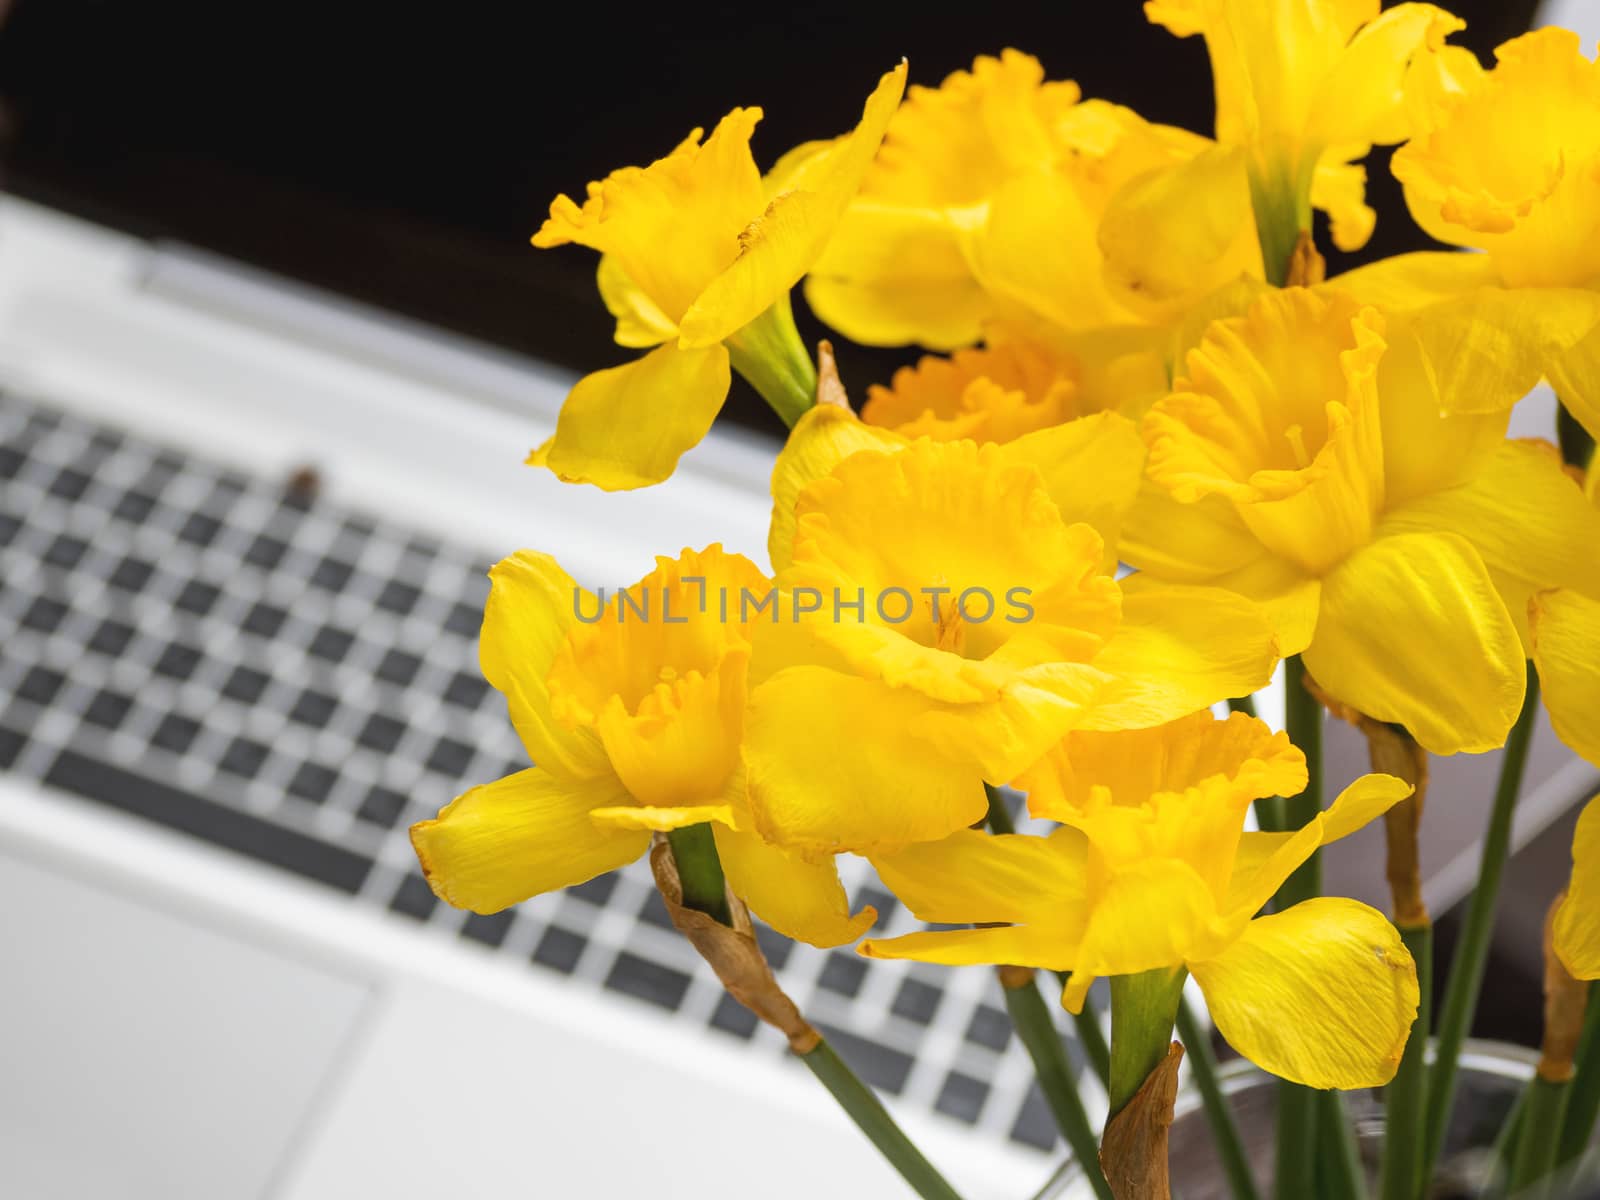 Bouquet of Narcissus or daffodils in glass vase over silver metal laptop. Bright yellow flowers with portable device. Wooden background. by aksenovko